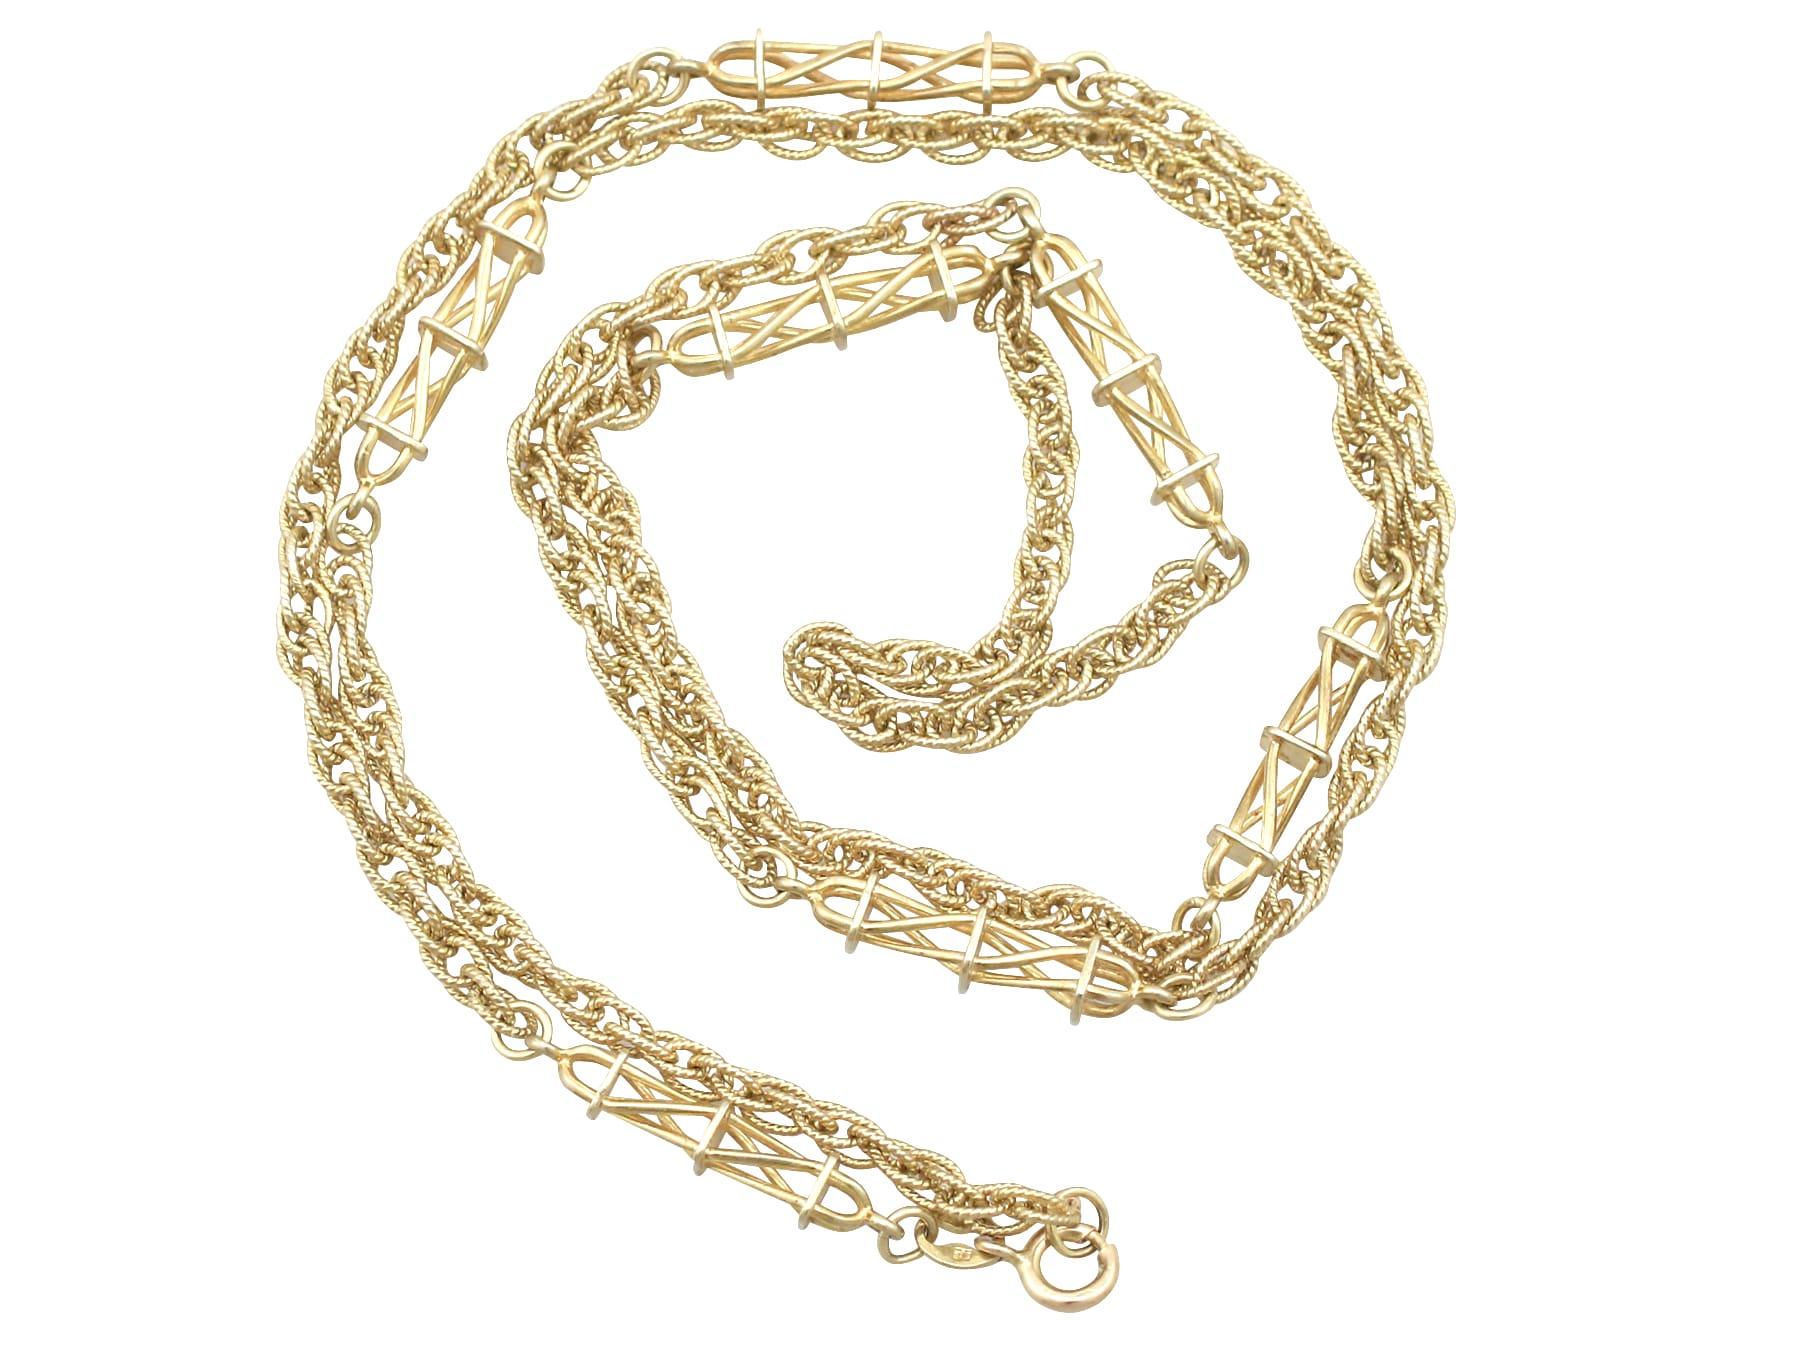 An impressive vintage 9 karat yellow gold rope chain with 10 karat yellow gold clasp; part of our diverse vintage jewelry and estate jewelry collections.

This fine and impressive rope chain has been crafted in 9k yellow gold.

The Singapore style